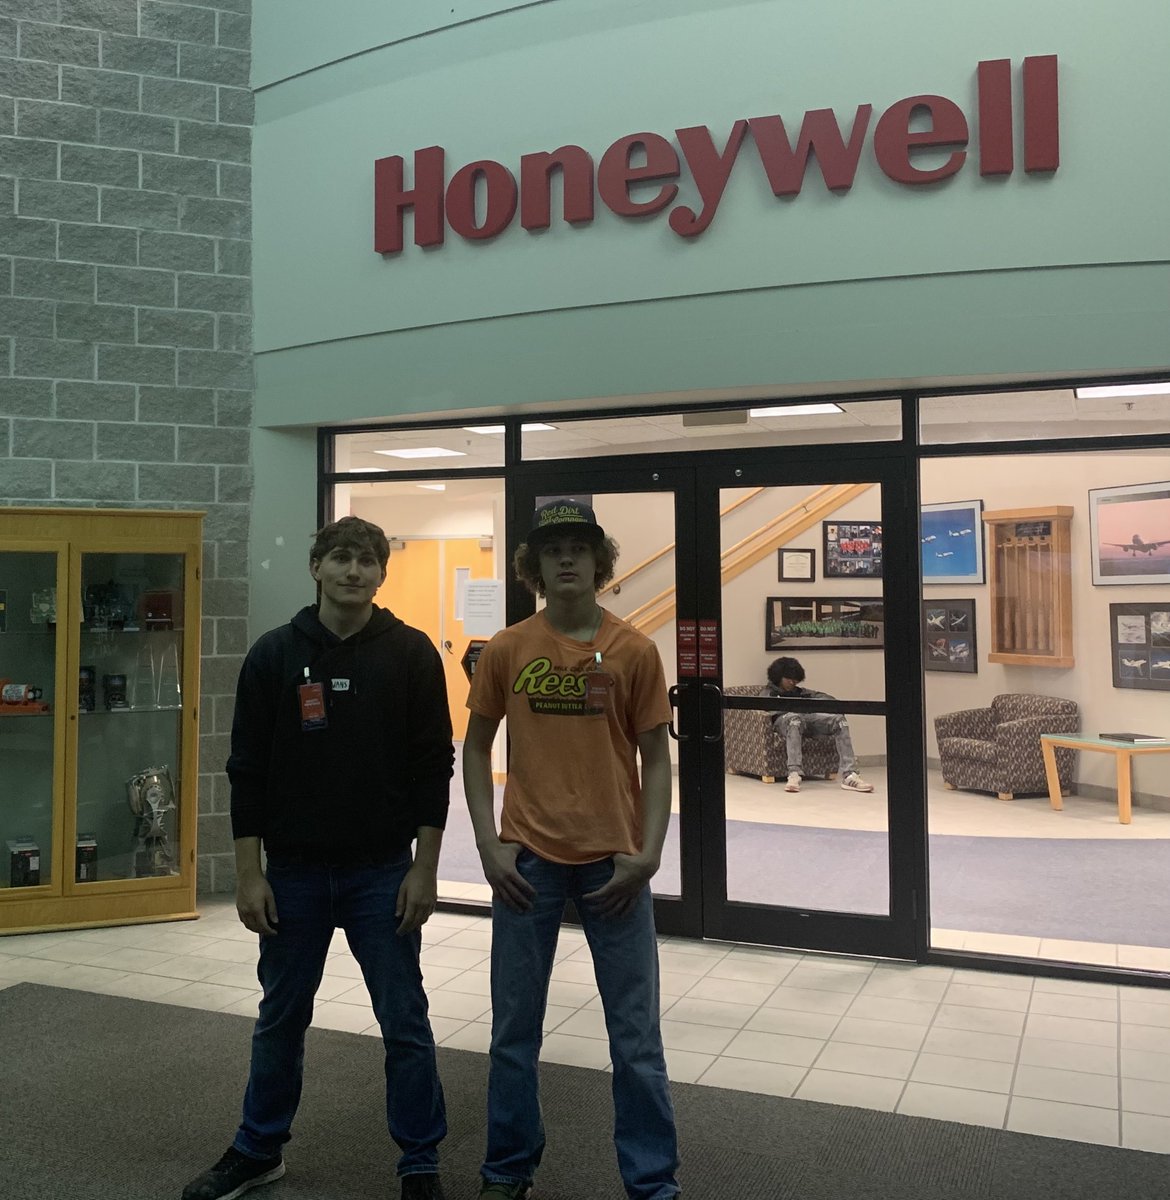 We love helping students explore careers! @EudoraSchools students Michael Thorne (left) and Carson Moore (right) recently were hosted by prospective employer Honeywell. Thank you @honeywell for considering JAG-K students for employment! #JAGKSupporters #JAGKCareerExploration